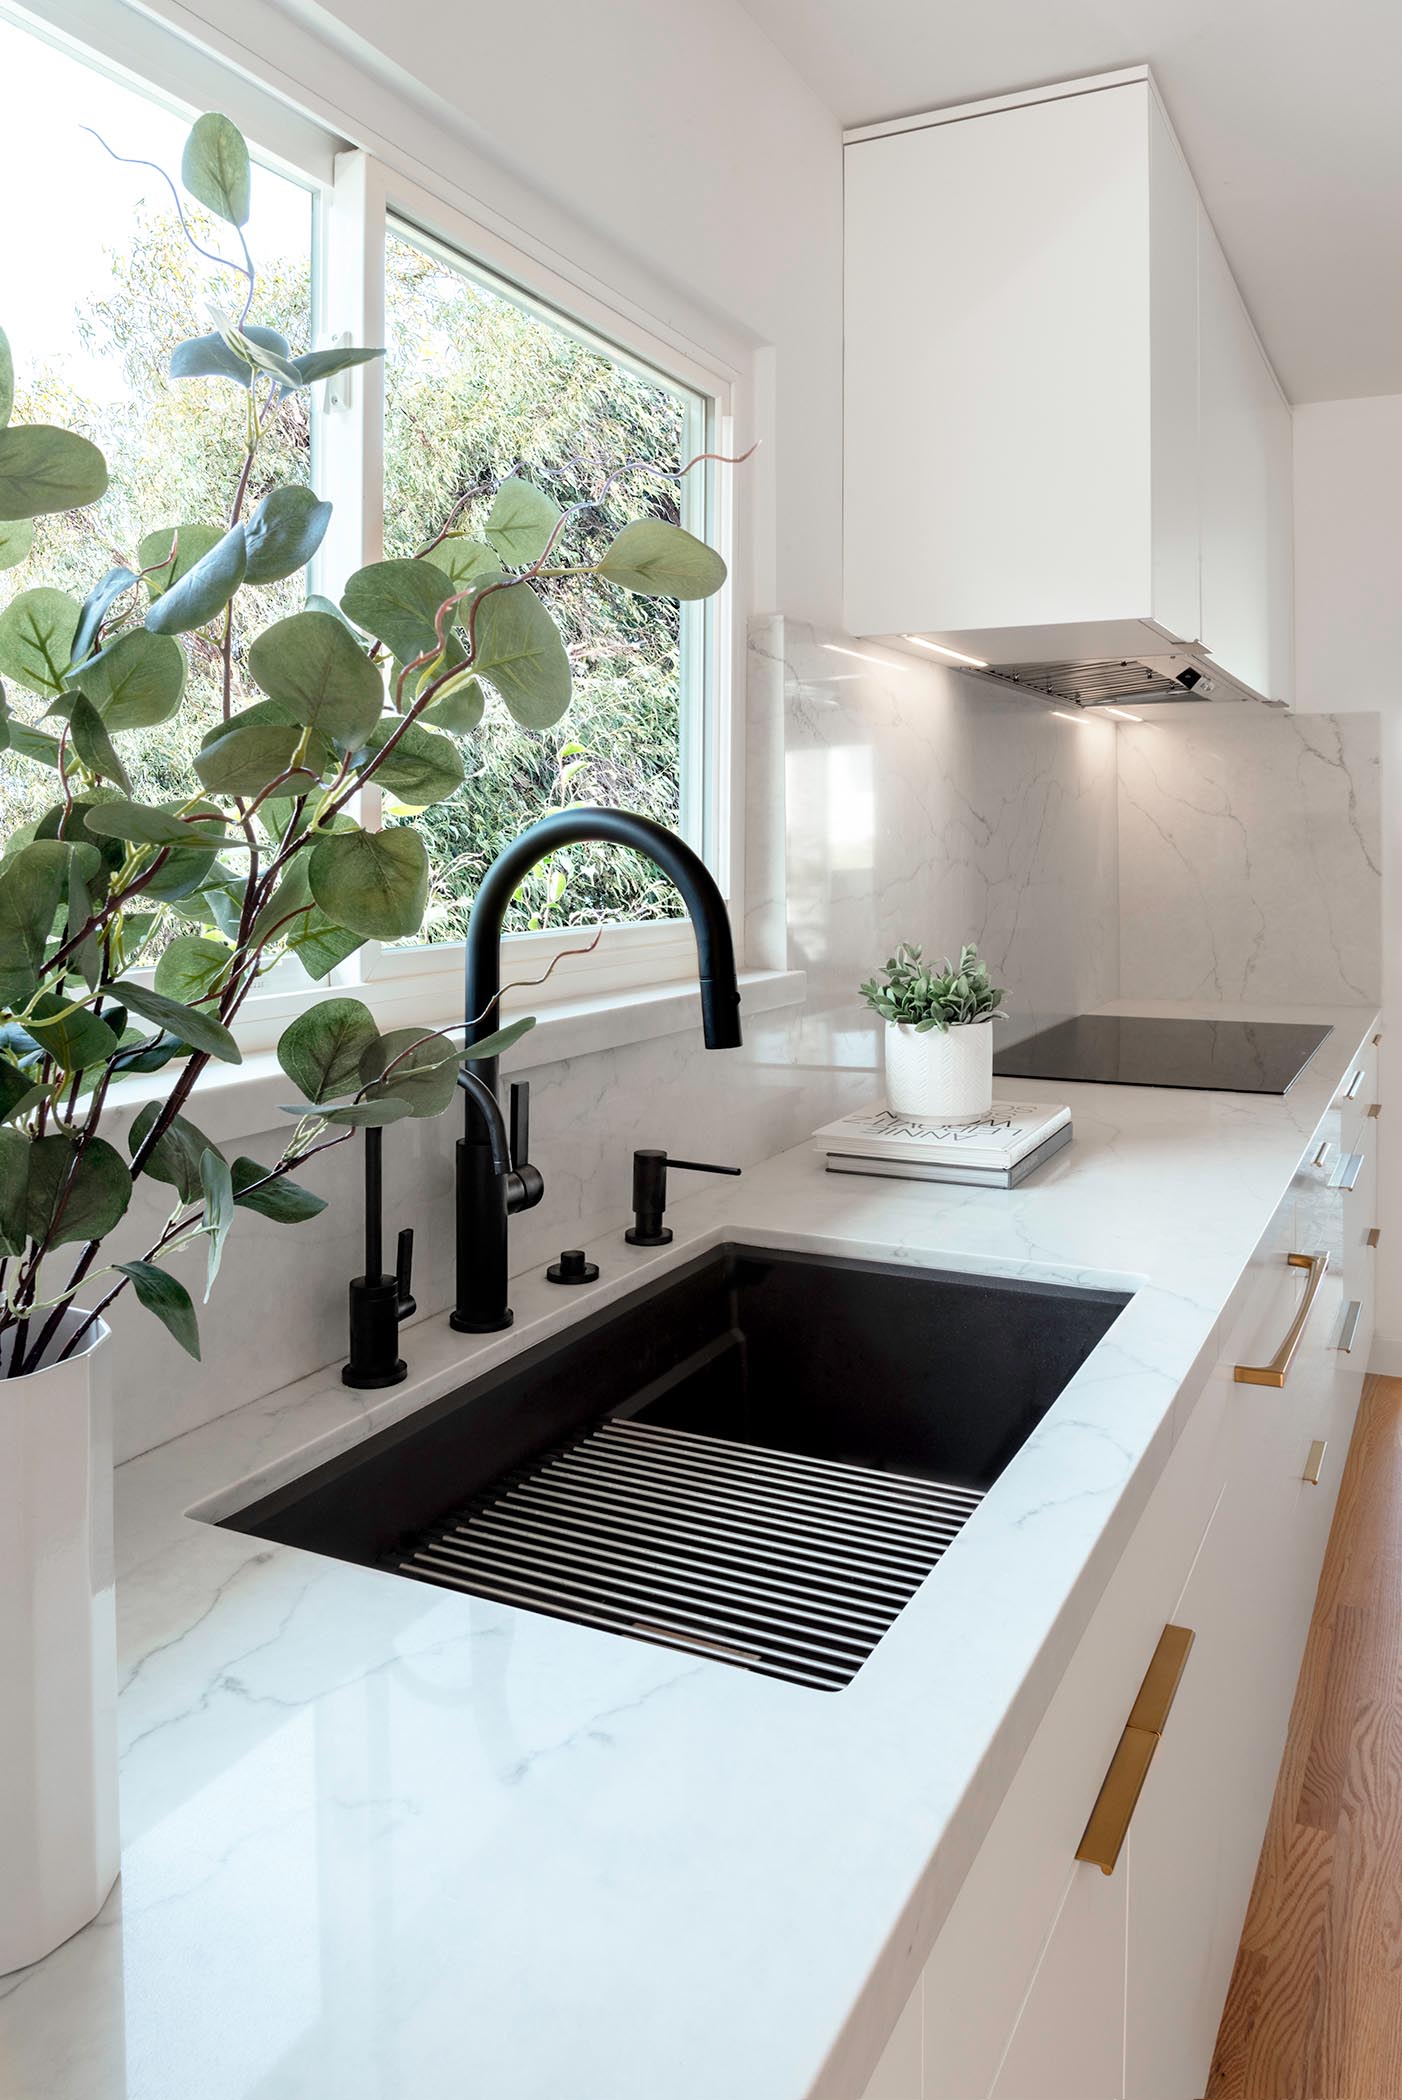 This matte black kitchen sink, which sits below the window, has a matching black faucet and hardware, while the cabinetry hardware adds a luxurious metallic touch.